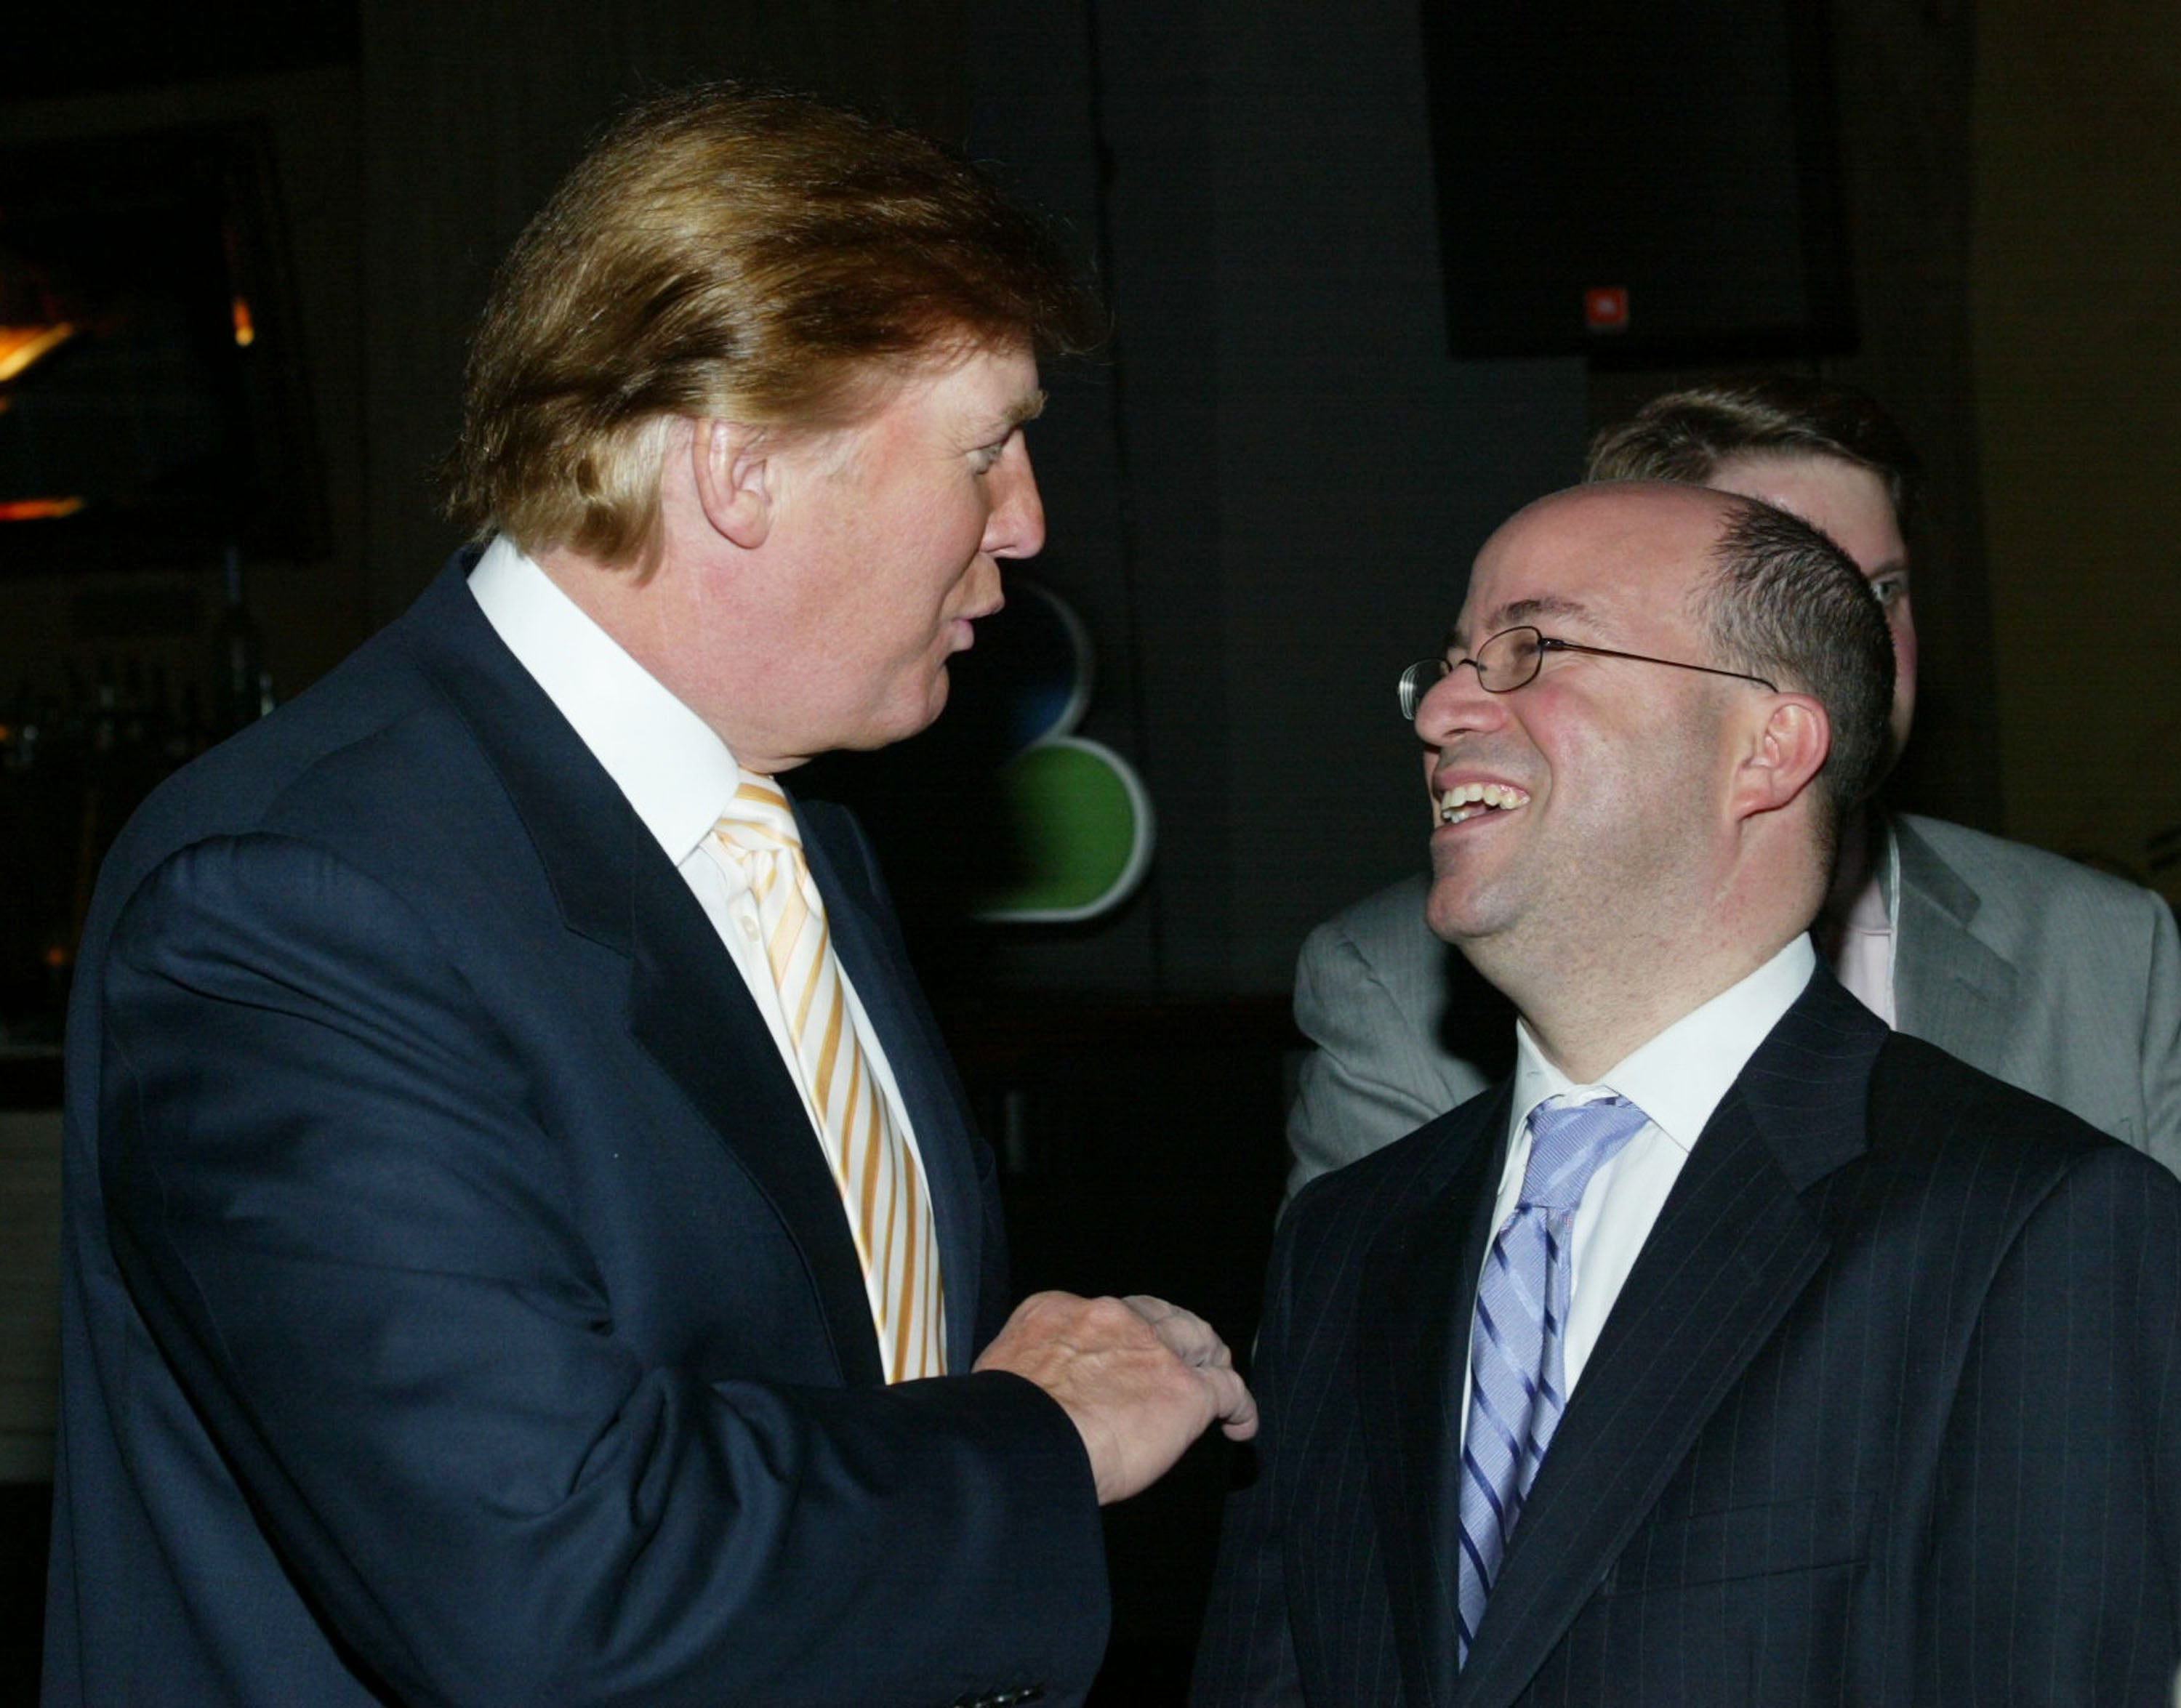 Jeff Zucker helped make a TV star of Donald Trump when ‘The Apprentice’ started airing in 2004